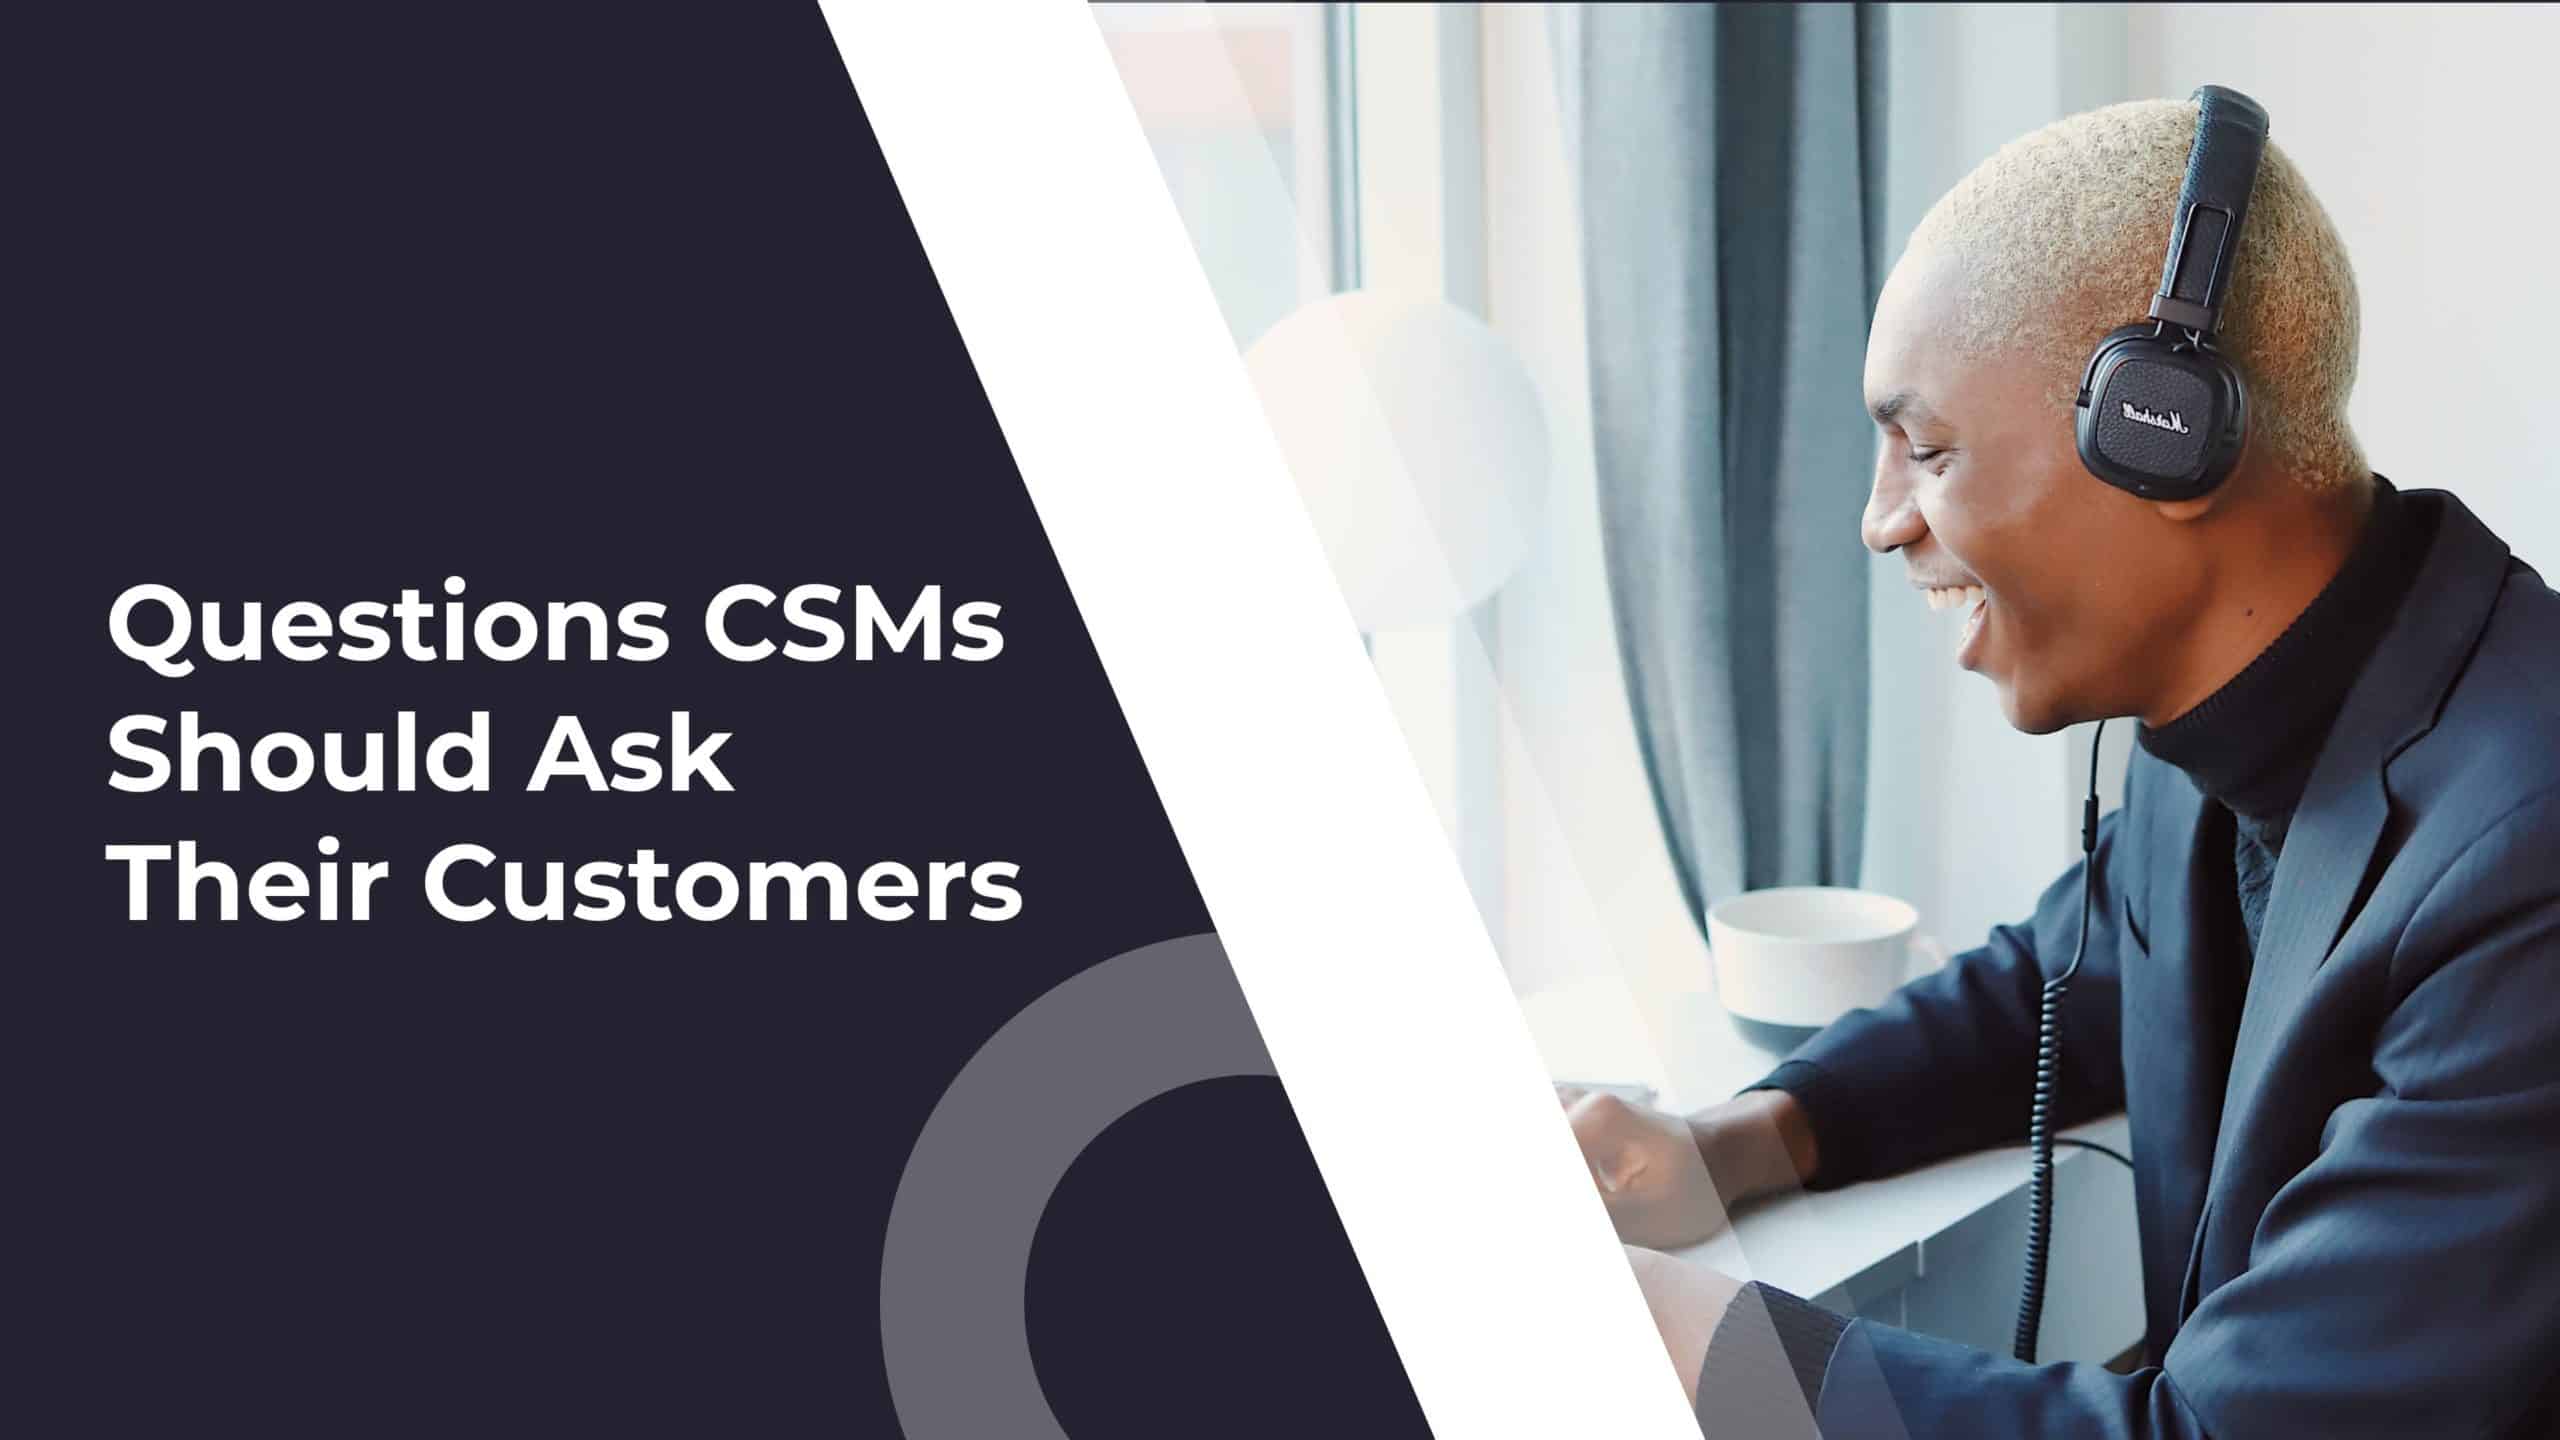 Most Important Questions CSMs Should Ask Their Customers